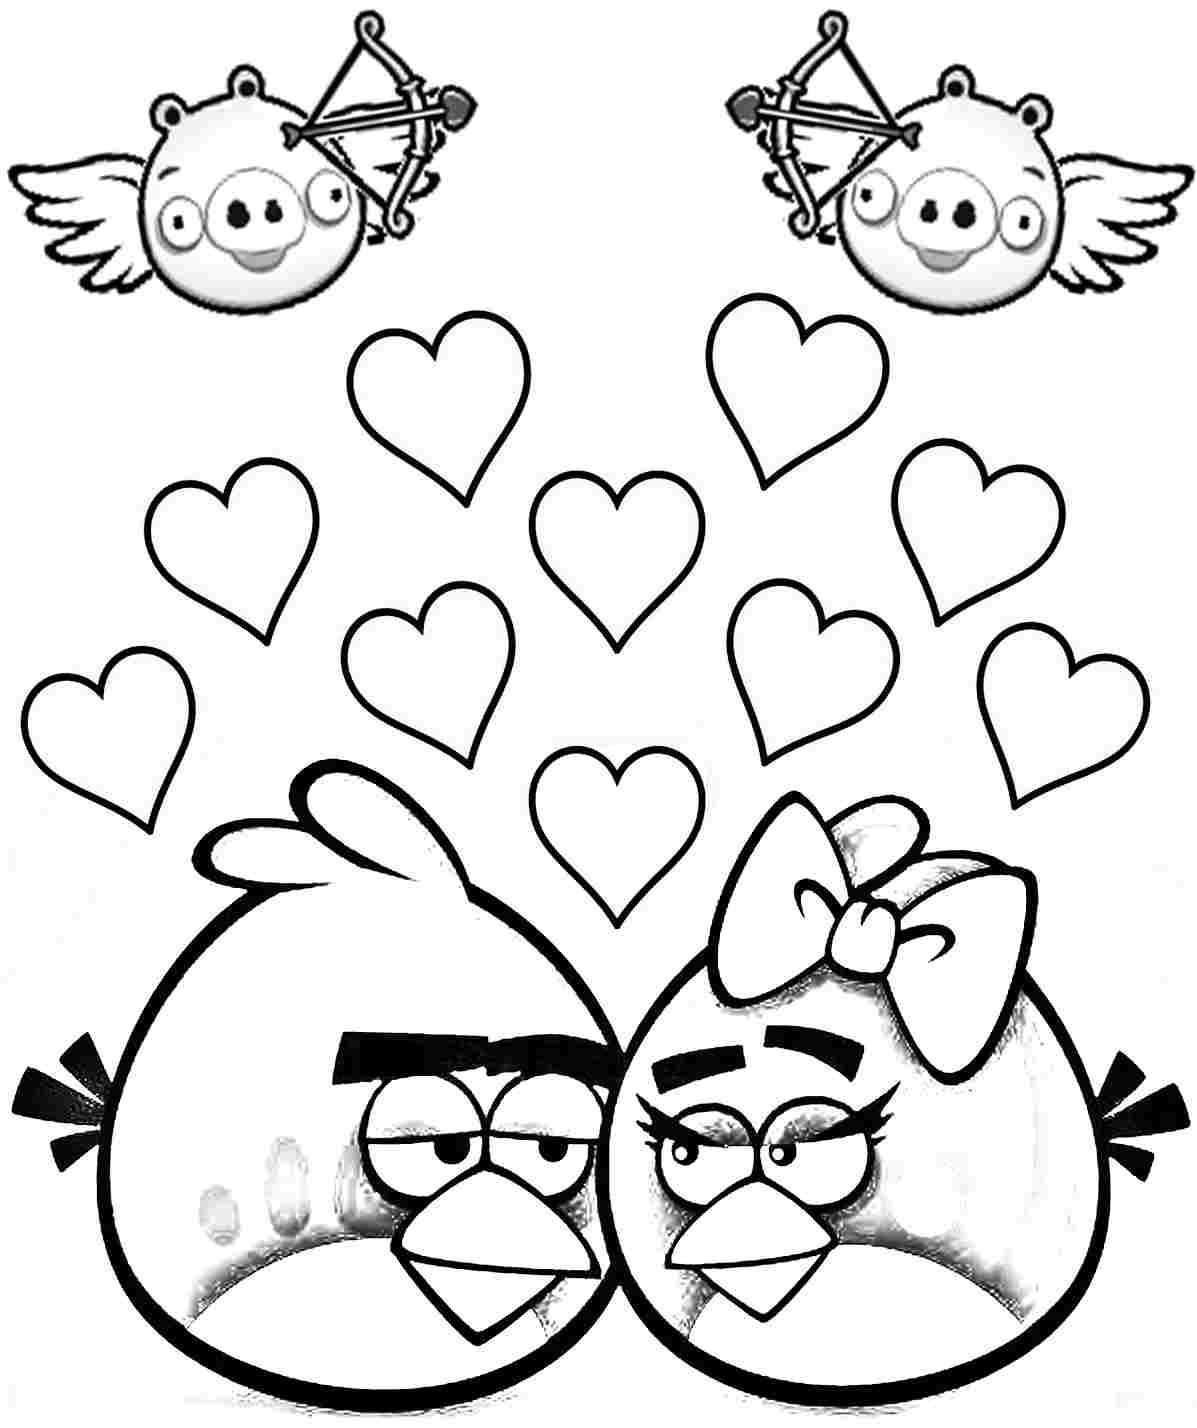 Valentine Coloring Pages For Boys
 Valentines Day Coloring Pages For Boys at GetColorings